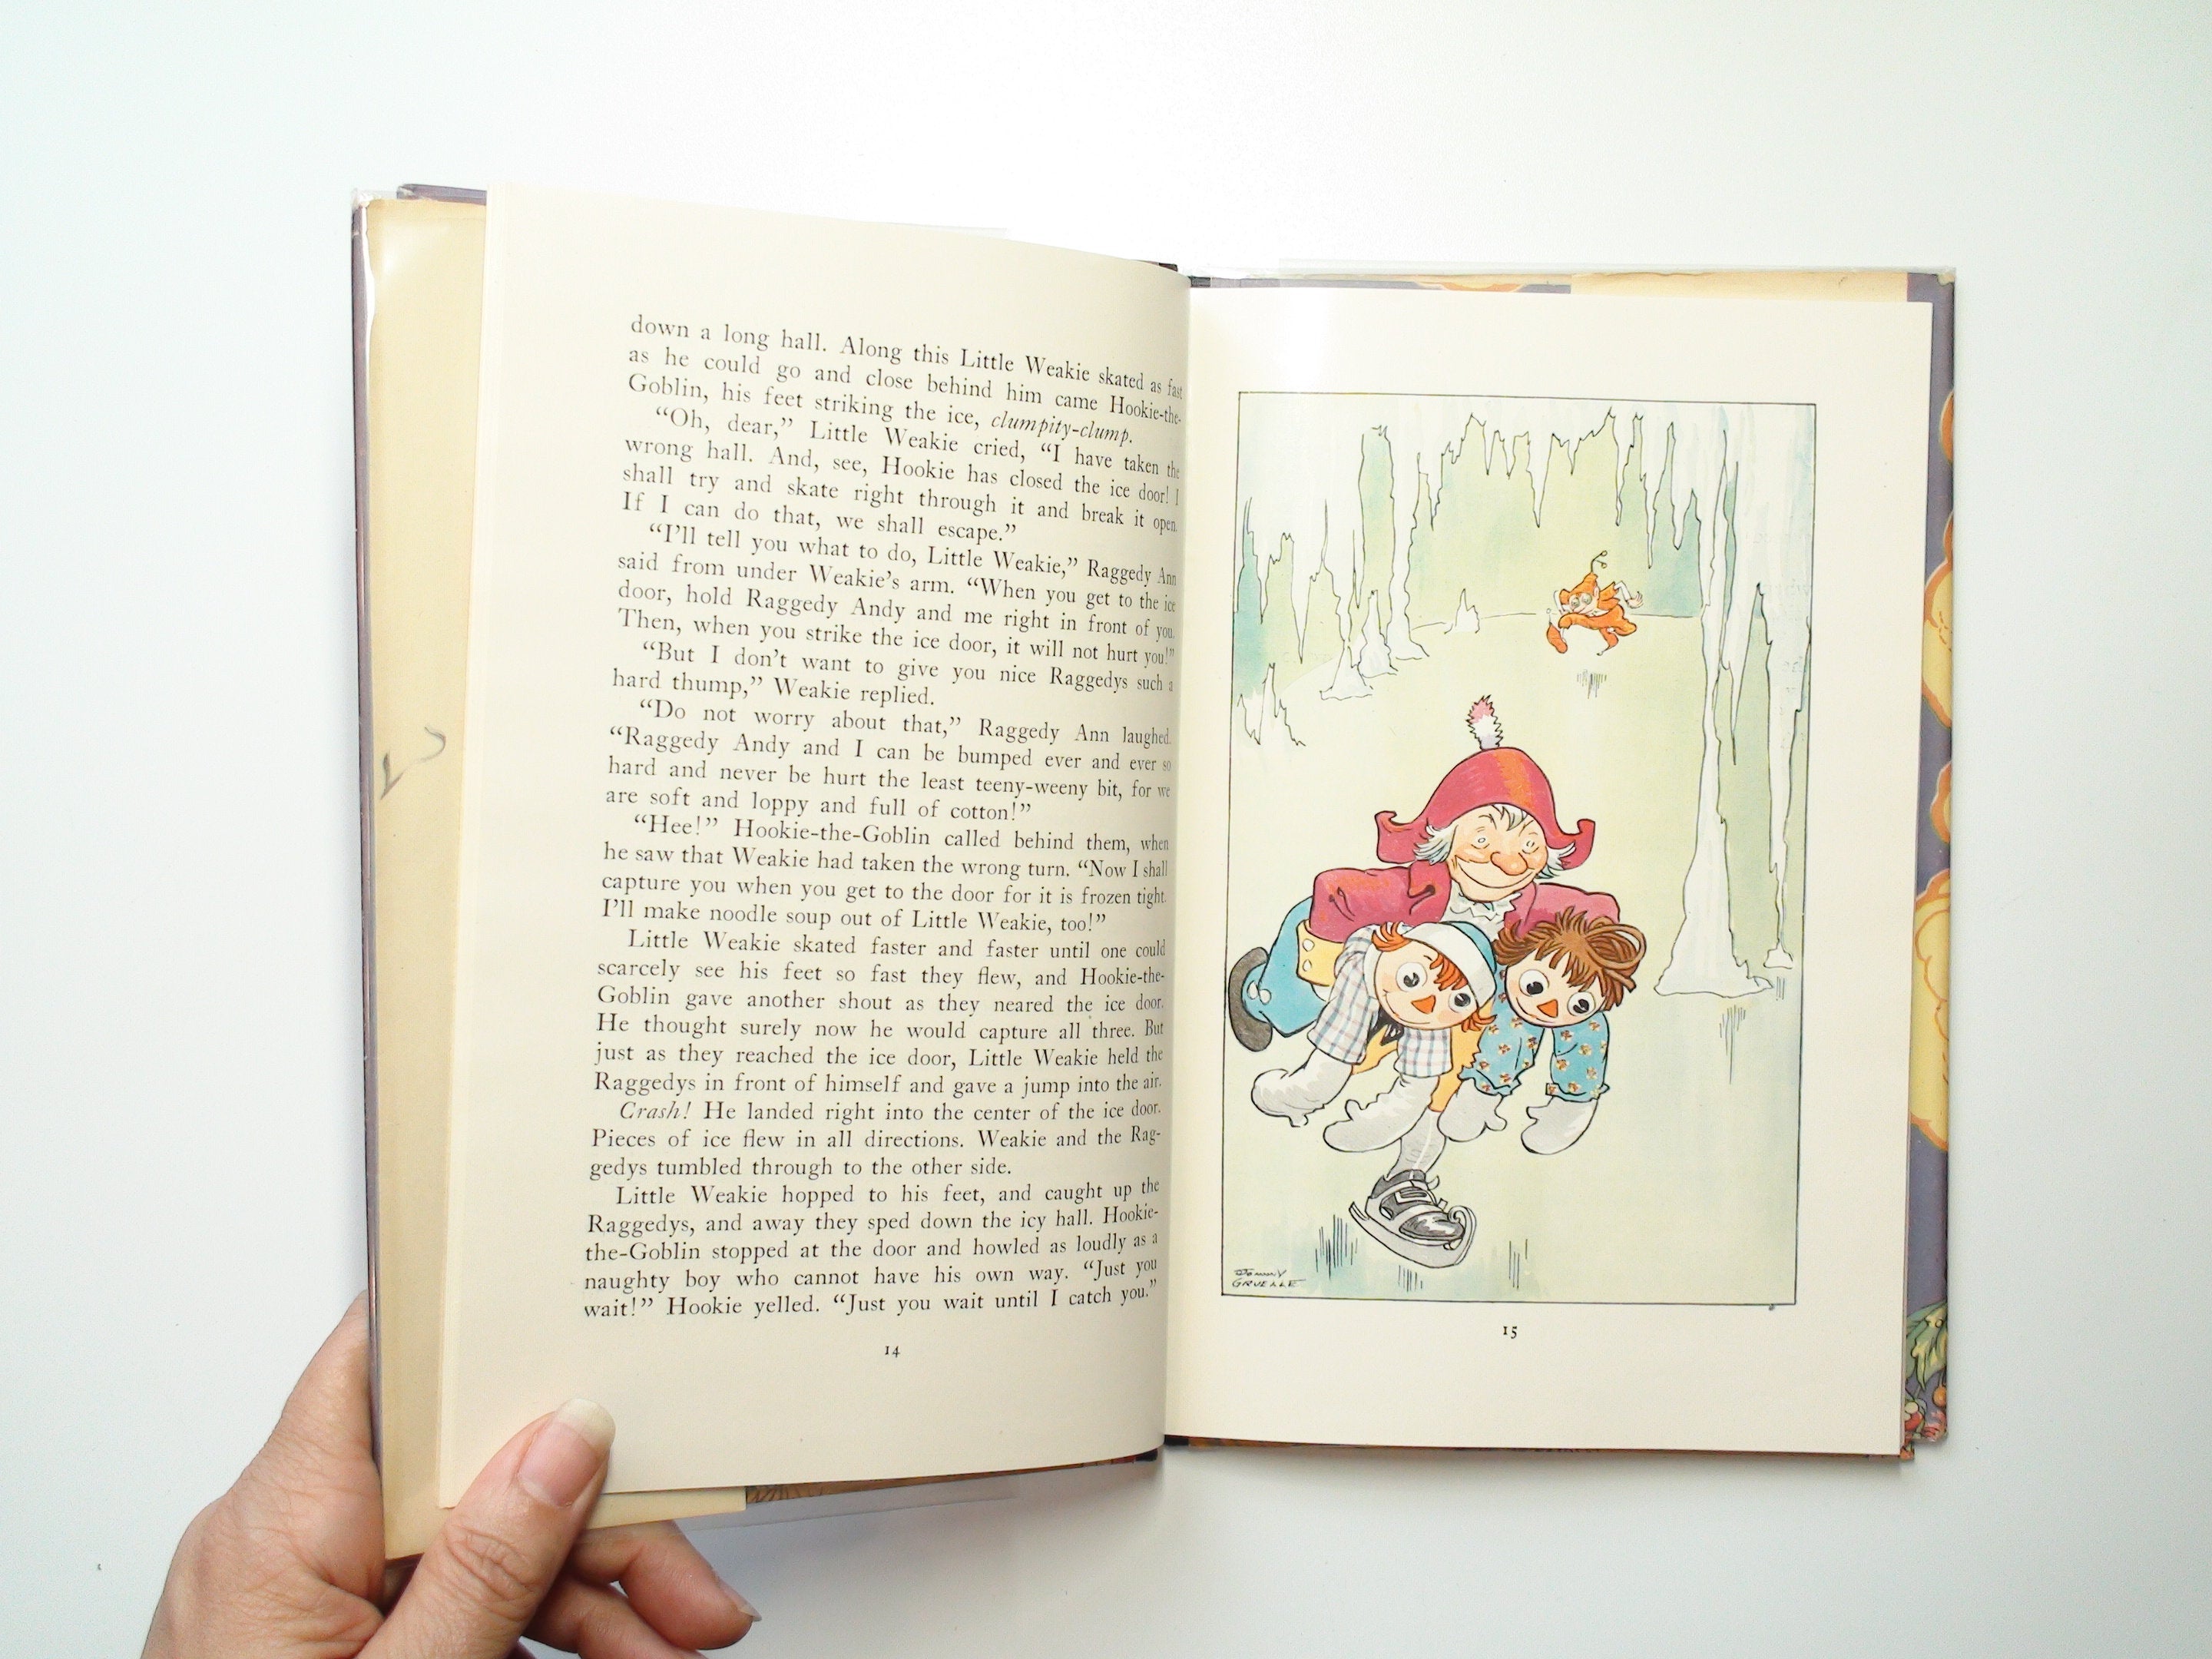 Raggedy Ann in Cookie Land, Johnny Gruelle, 1st Ed, w DJ, Illustrated, 1931, Very Good